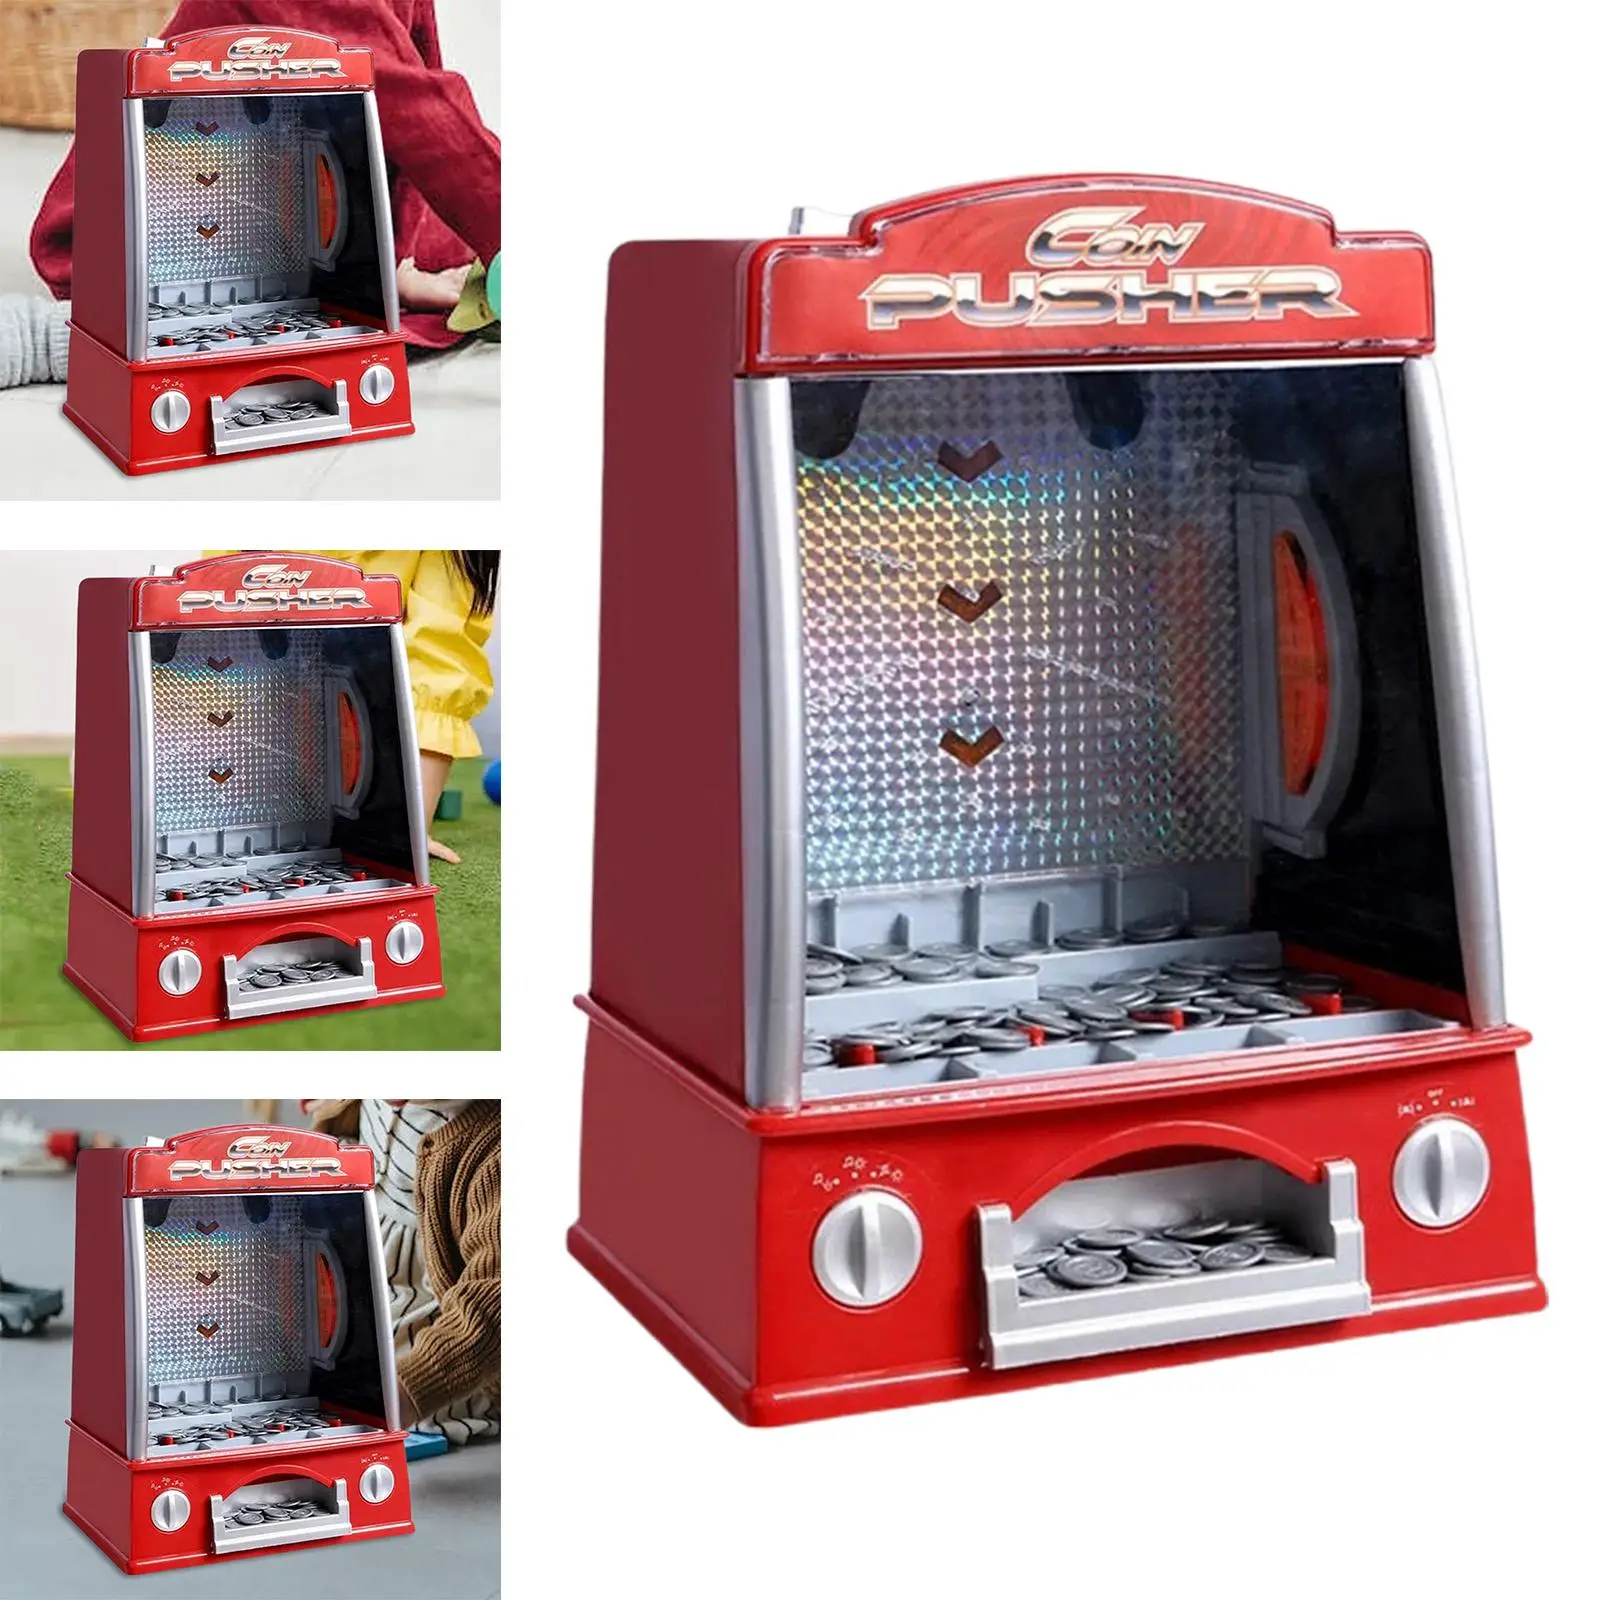 Electronic Arcade Game Machine with 150 Game Tokens Novelty for Kids